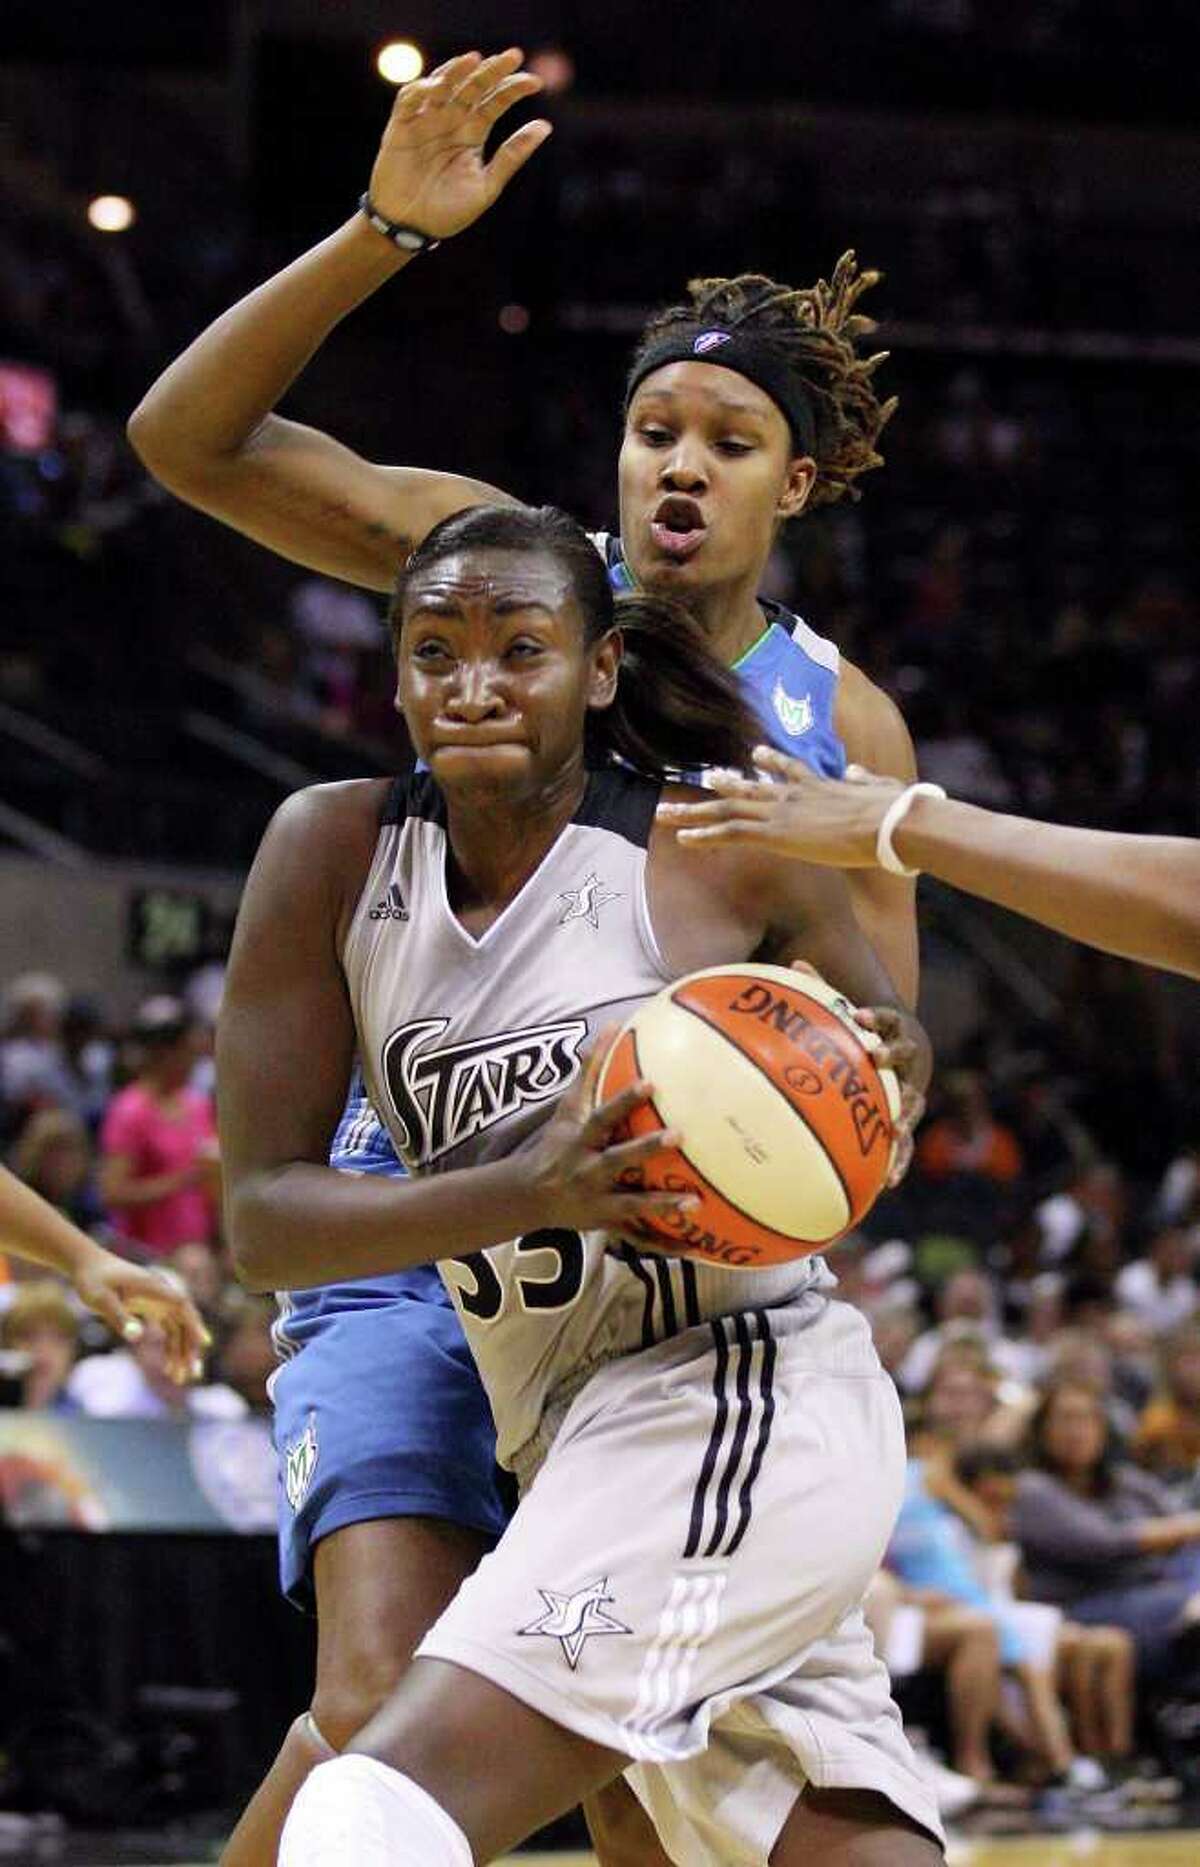 Silver Stars' Sophia Young looks for room around Minnesota Lynx's Rebekkah Brunson during second half action of Game 2 in the Western Conference semifinal Sunday Sept. 18, 2011 at the AT&T Center. The Silver Stars won 84-75.